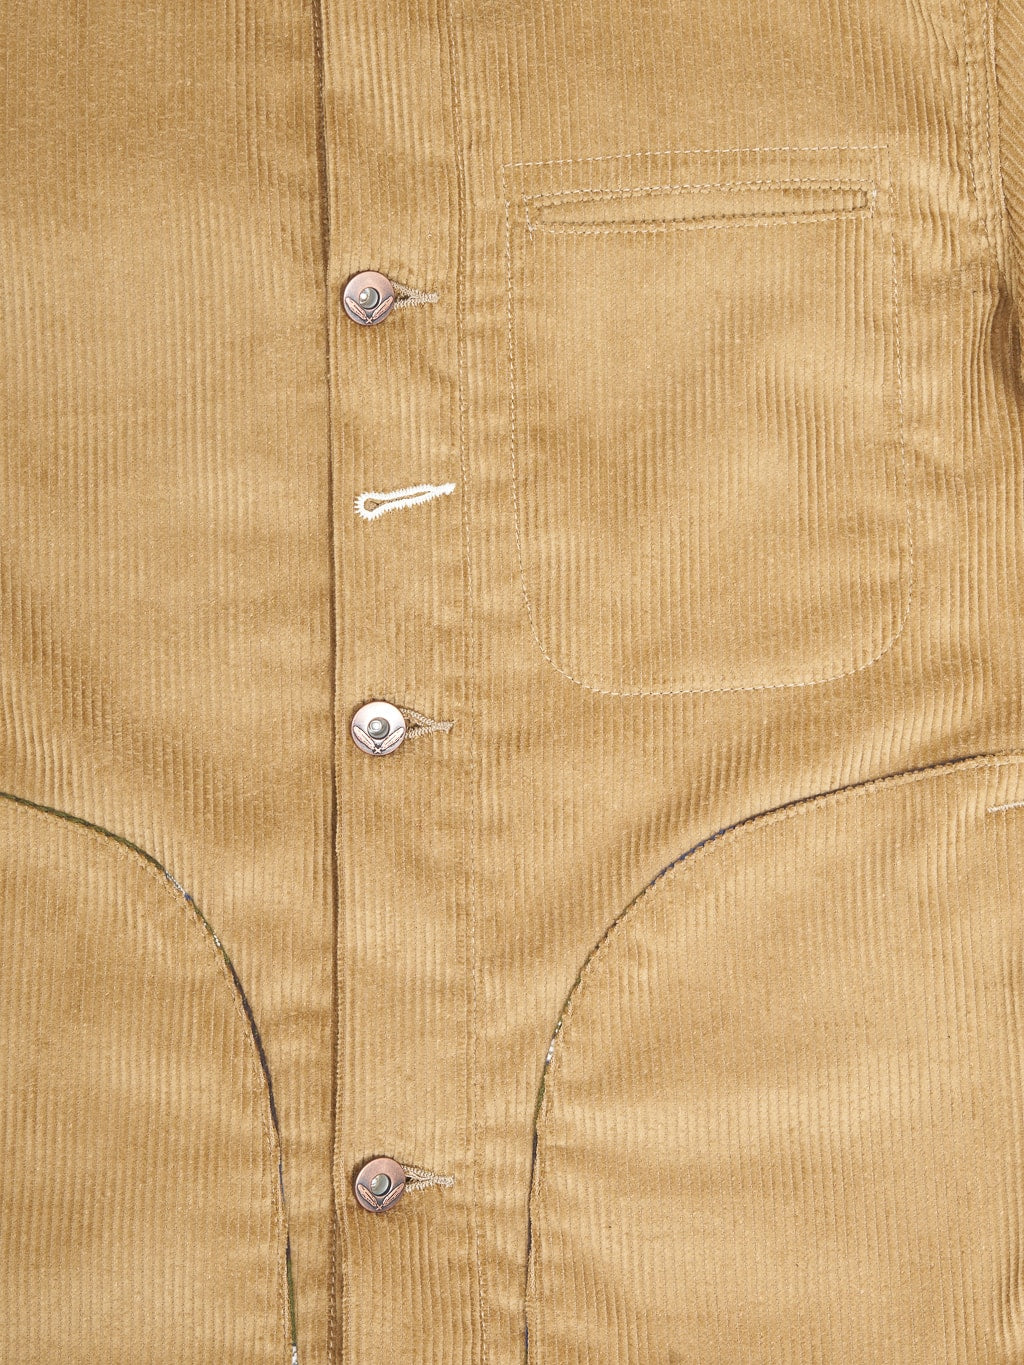 Rogue Territory Supply Jacket Lined Tan Corduroy buttons